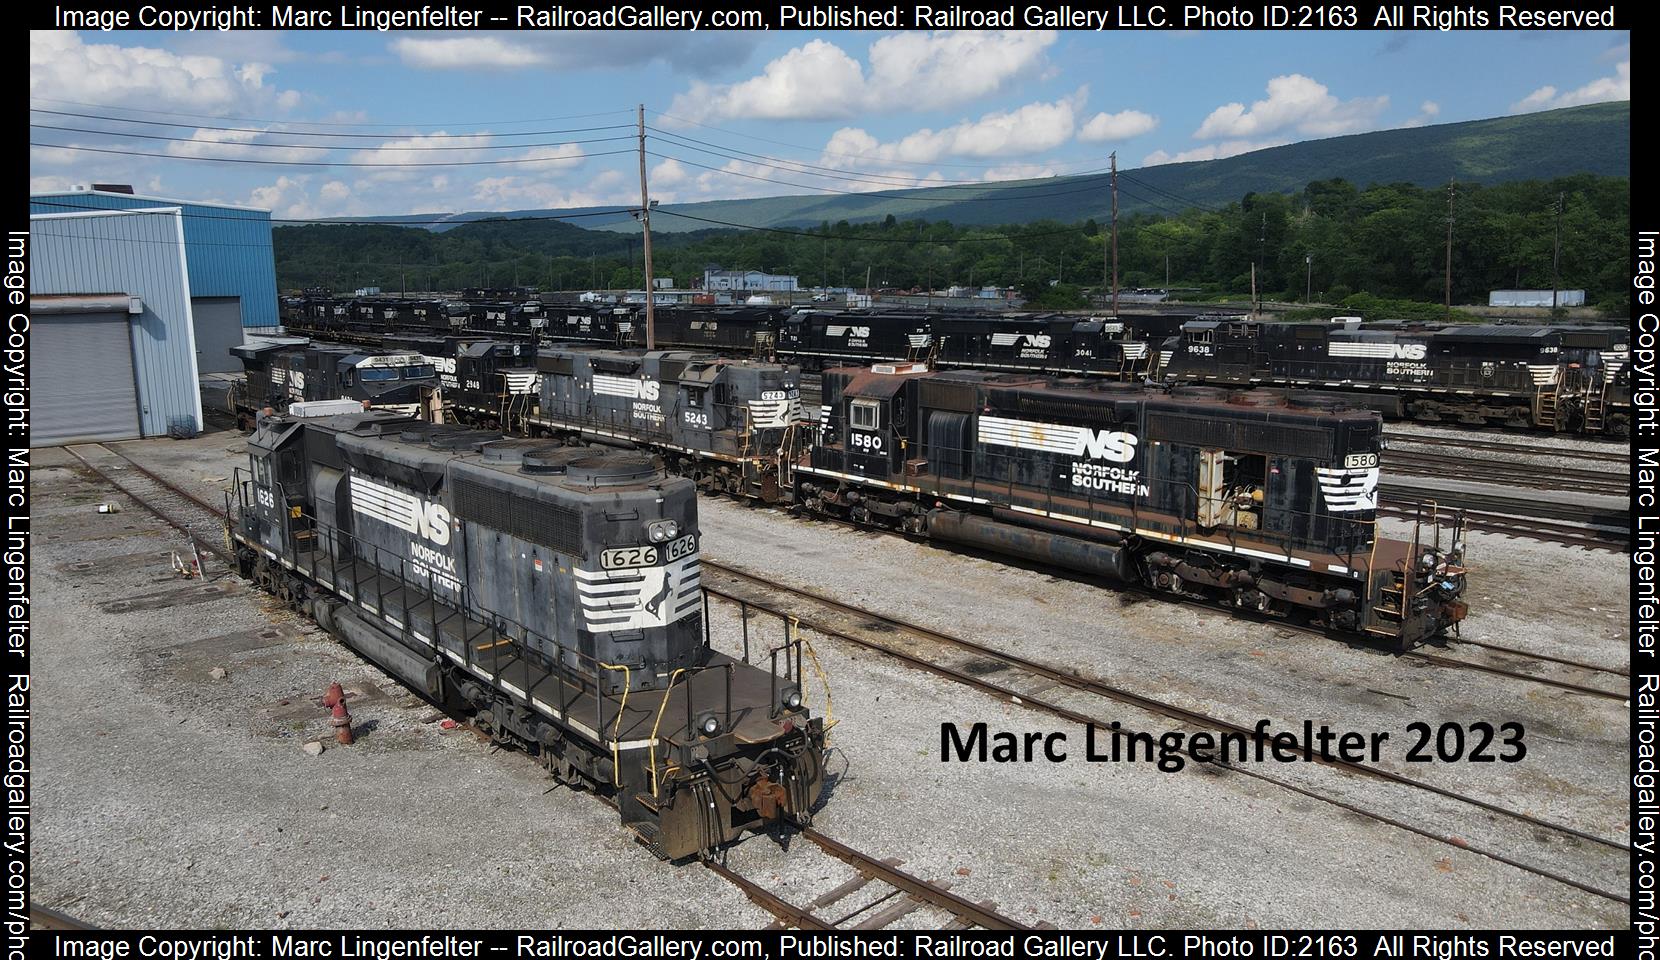 NS 1626 is a class EMD SD40-2 and  is pictured in Altoona, Pennsylvania, USA.  This was taken along the NS Juniata Shops on the Norfolk Southern. Photo Copyright: Marc Lingenfelter uploaded to Railroad Gallery on 06/26/2023. This photograph of NS 1626 was taken on Sunday, June 25, 2023. All Rights Reserved. 